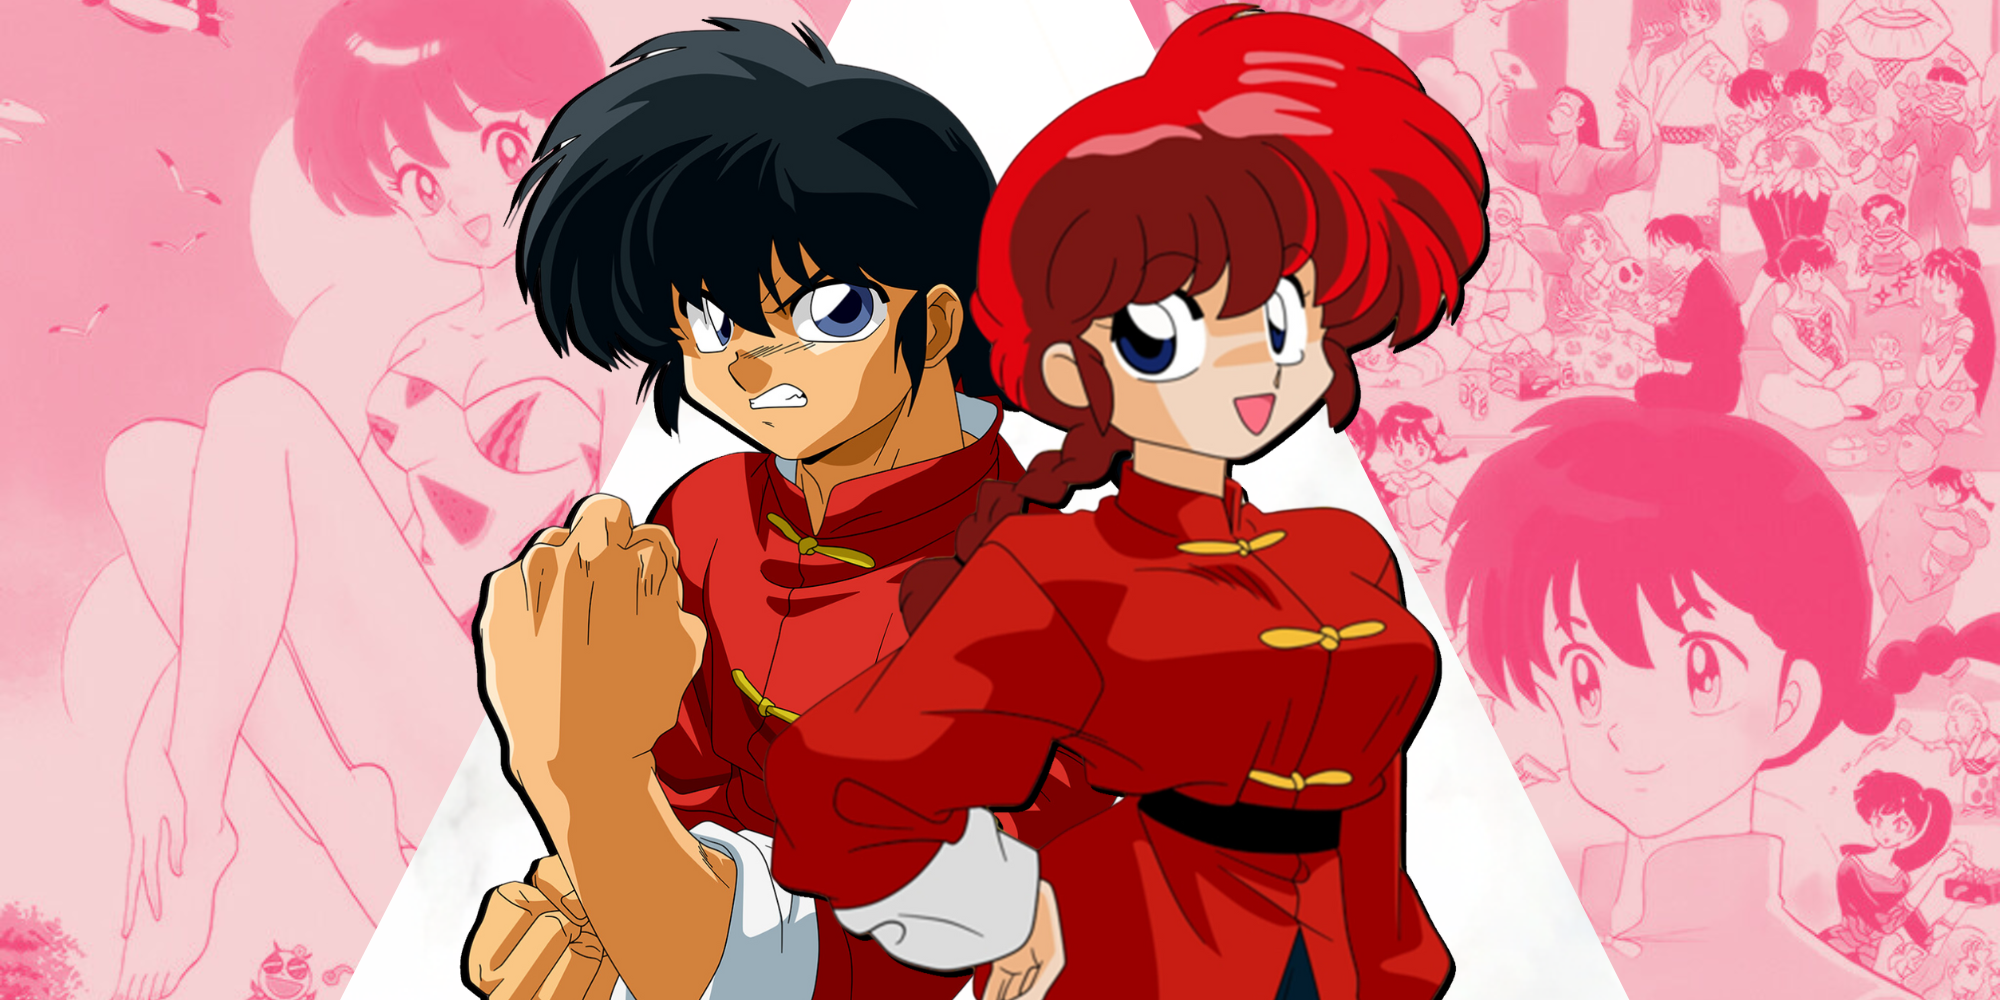 Custom Image of Ranma in the center with the cast of Ranma 12 in the background